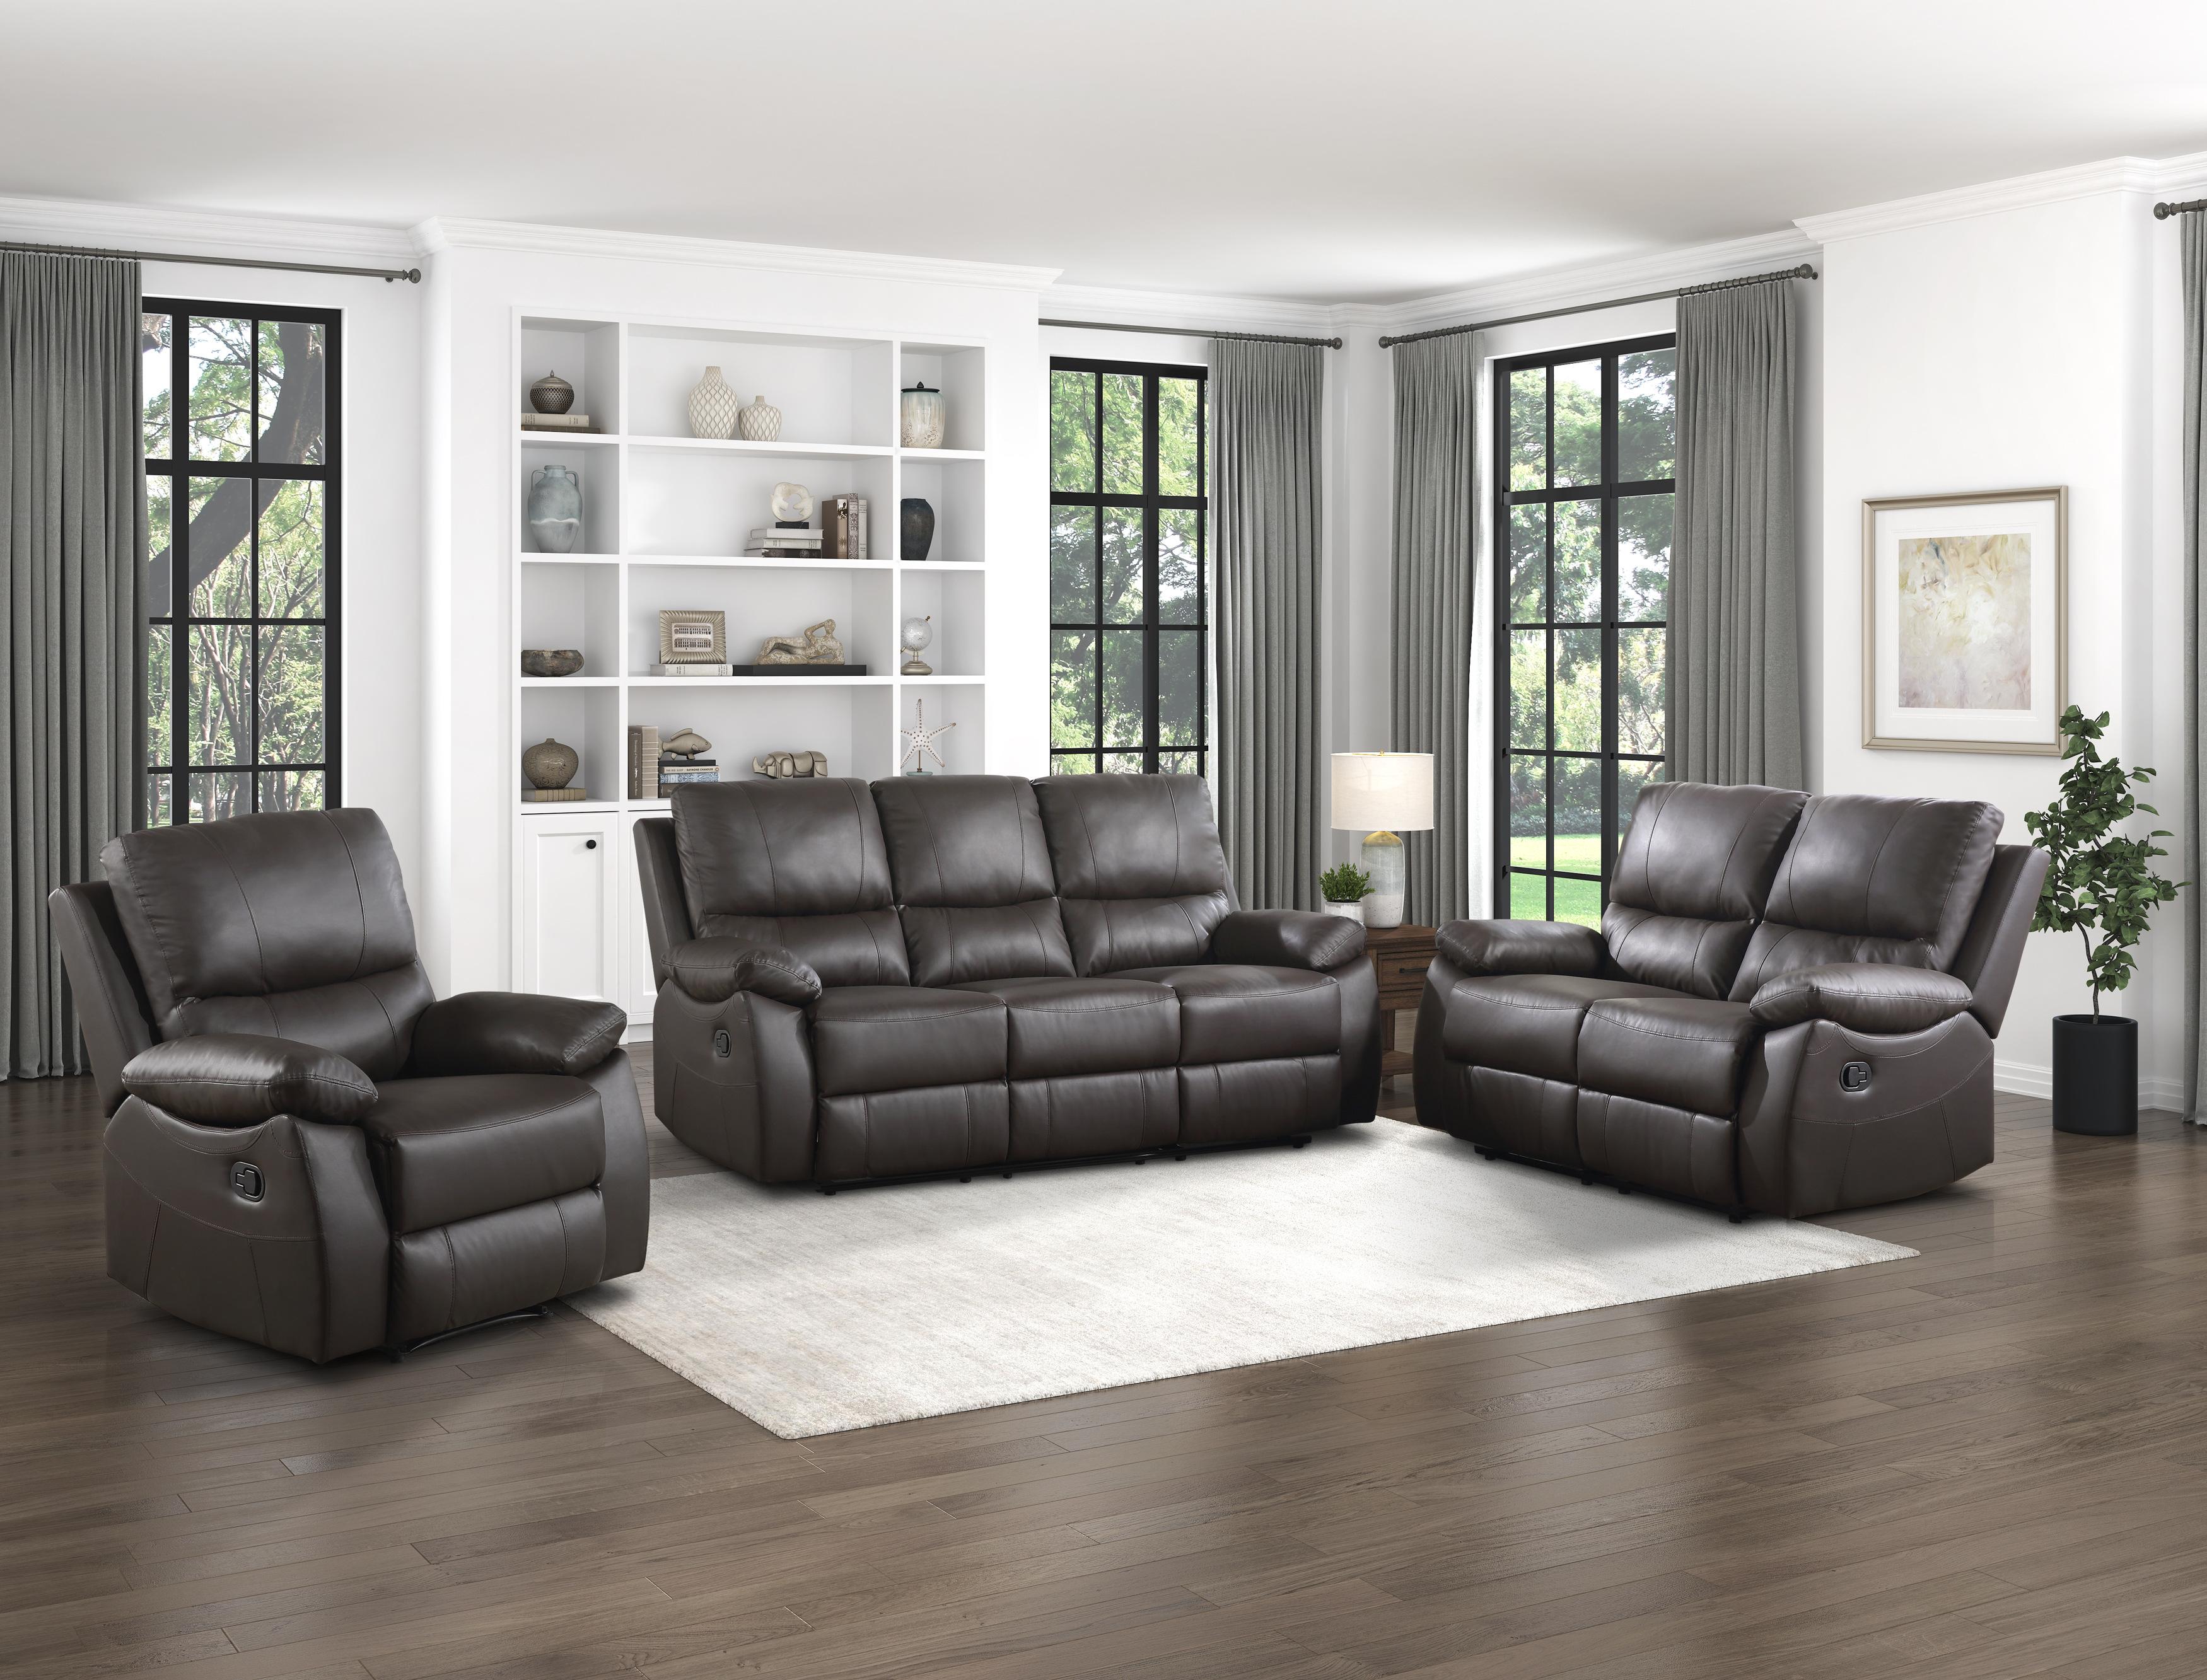 

    
Contemporary Brown Solid Wood Reclining Living Room Set 3PCS Homelegance Dawson 9368BRW-3-S-3PCS
